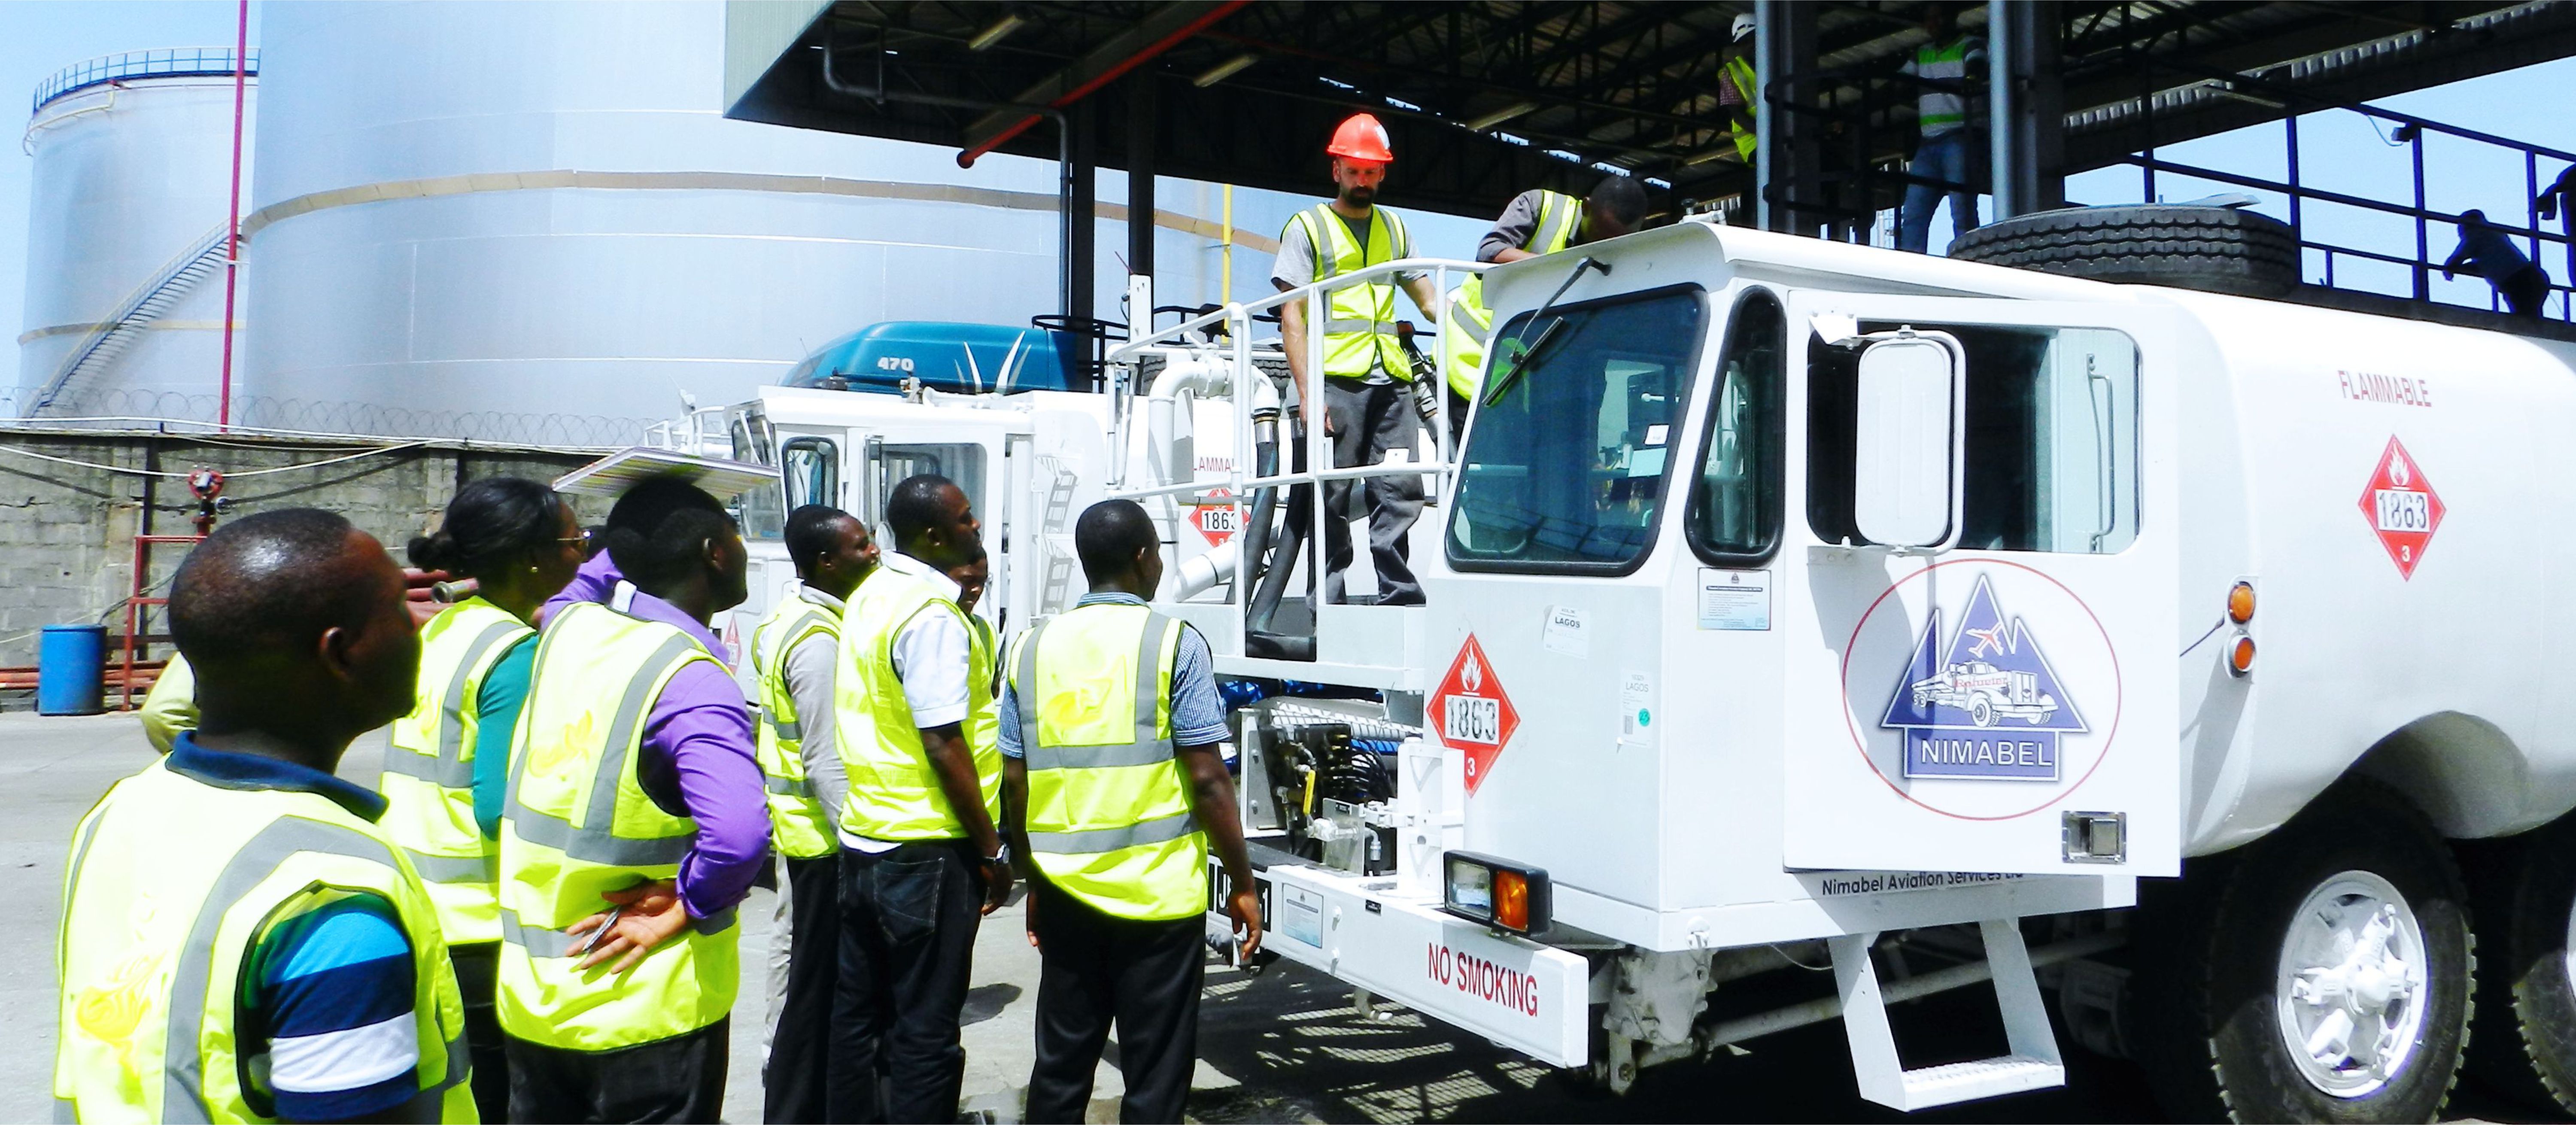 Jet A1 Mobile Refueling training on fuel receipt, recirculation and delivery